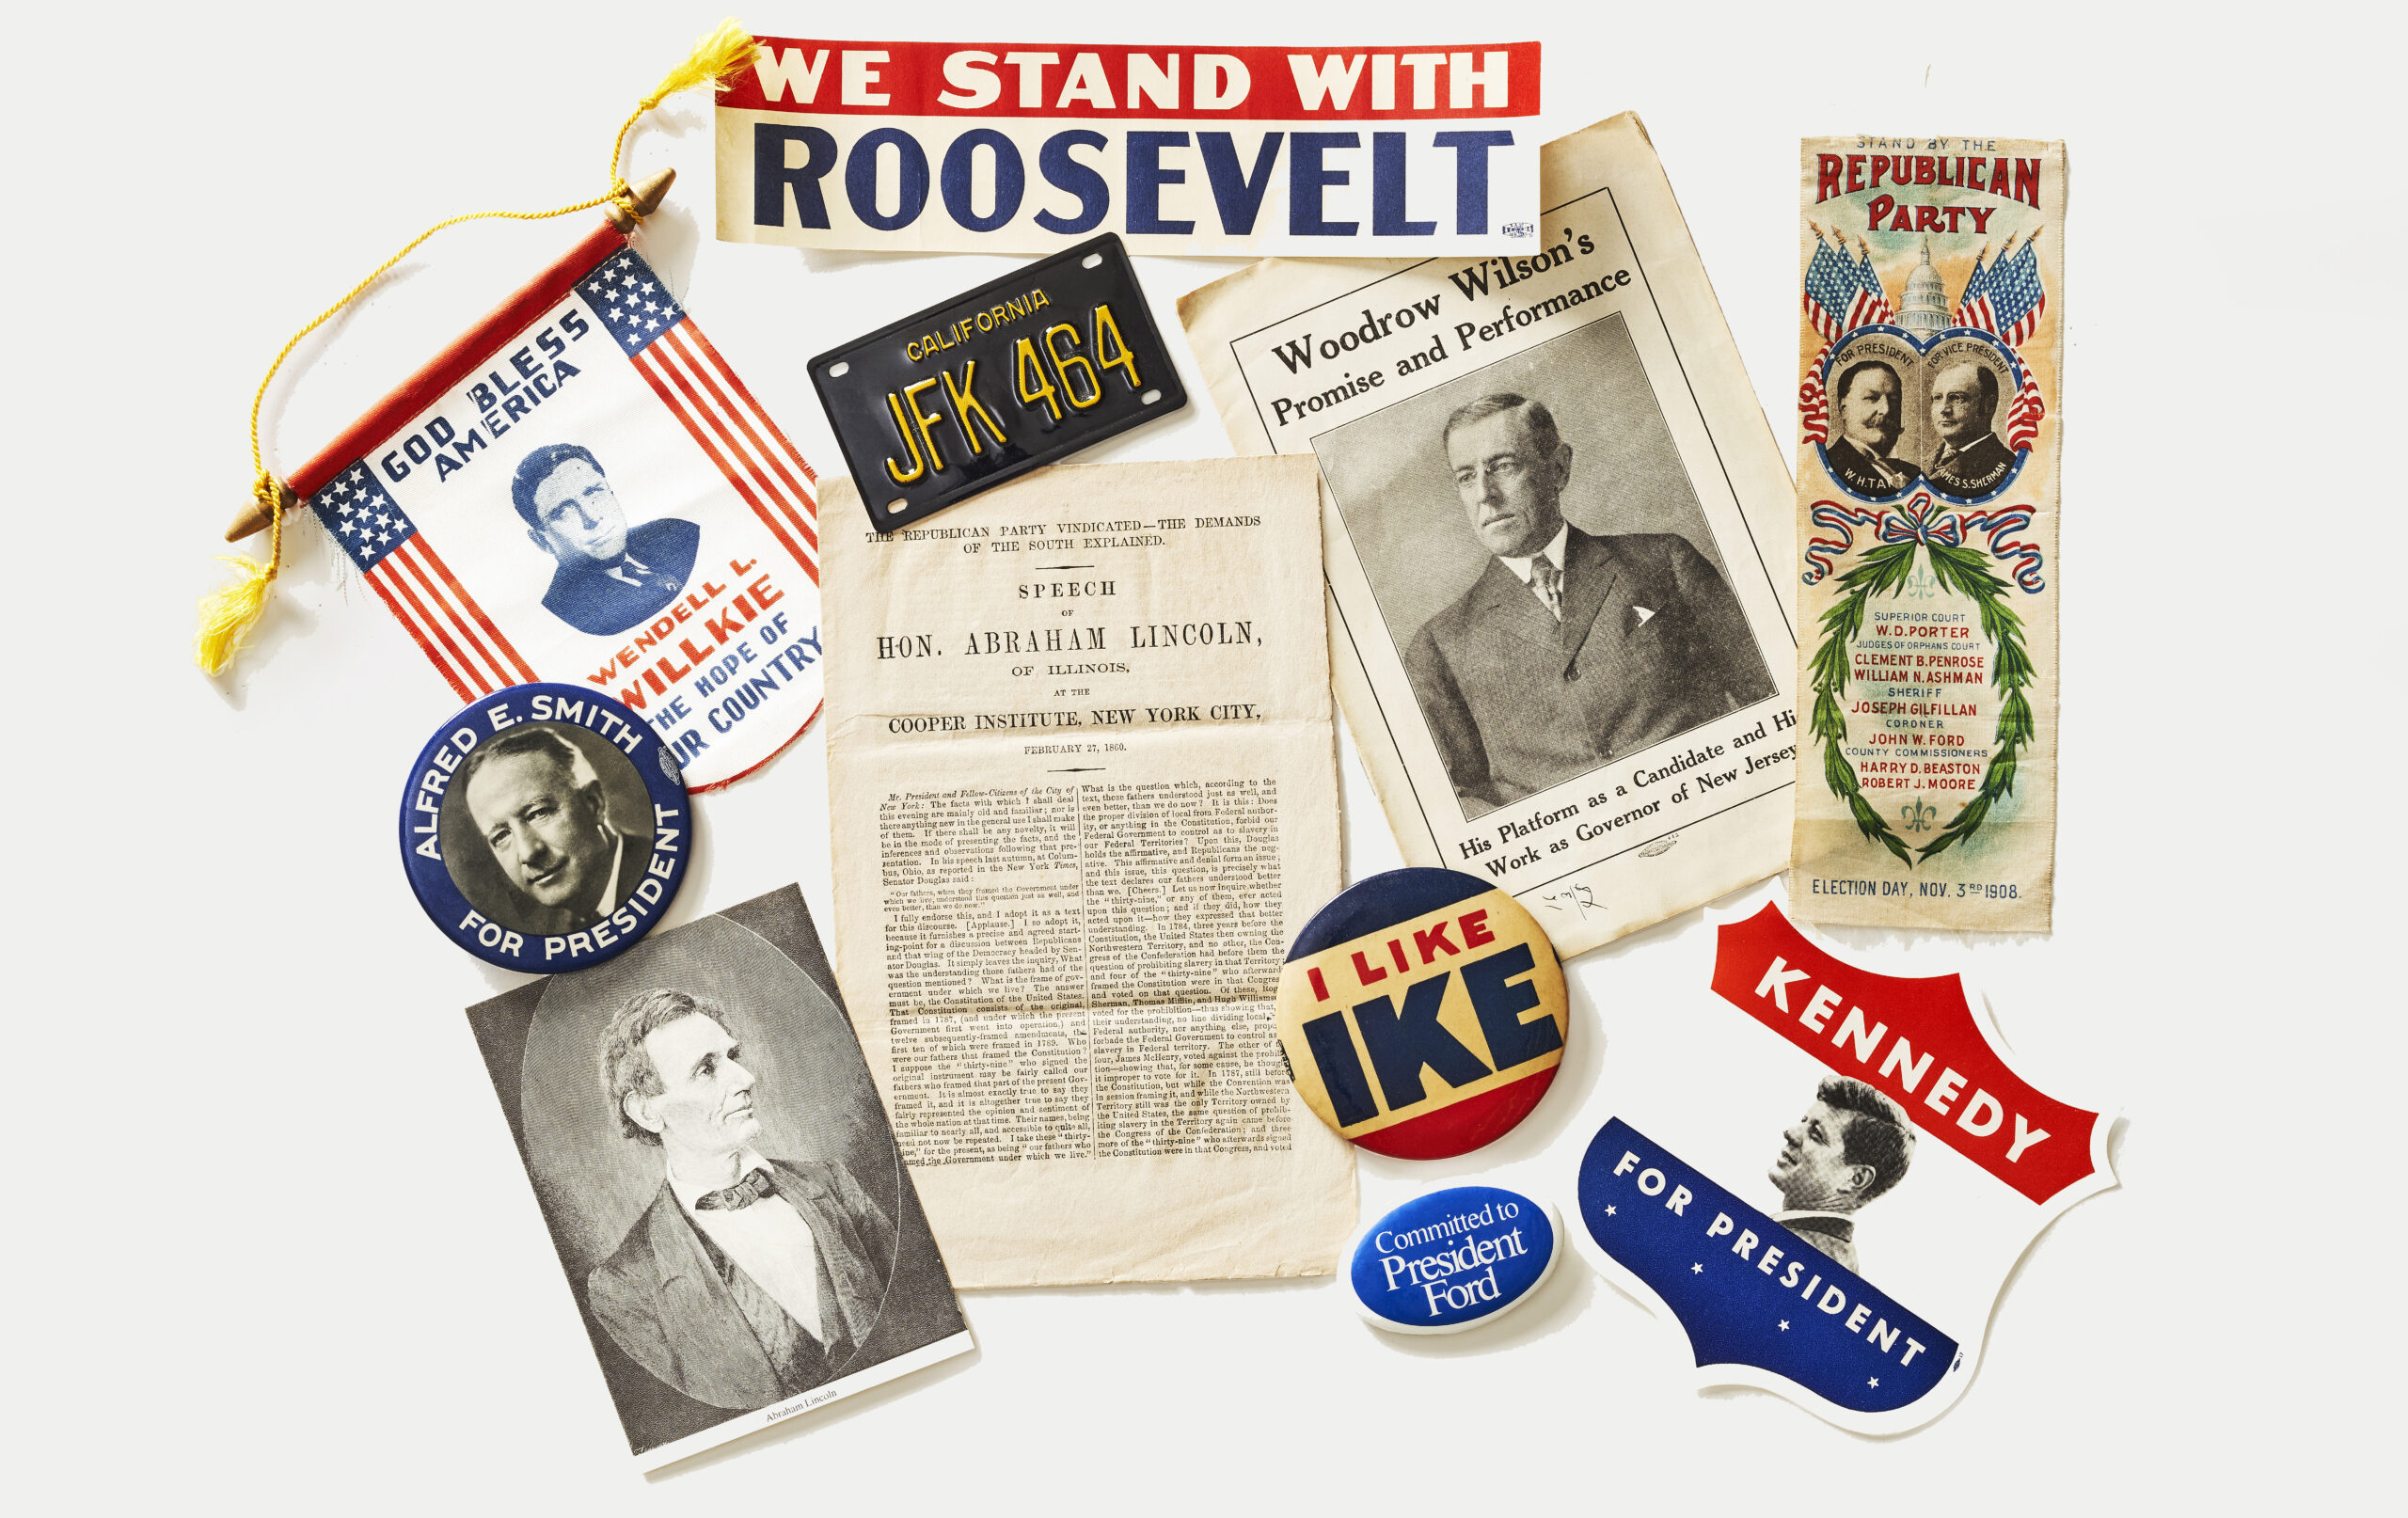 A collection of vintage campaign objects, including, buttons, pamphlets, photographs, a license plate and more.